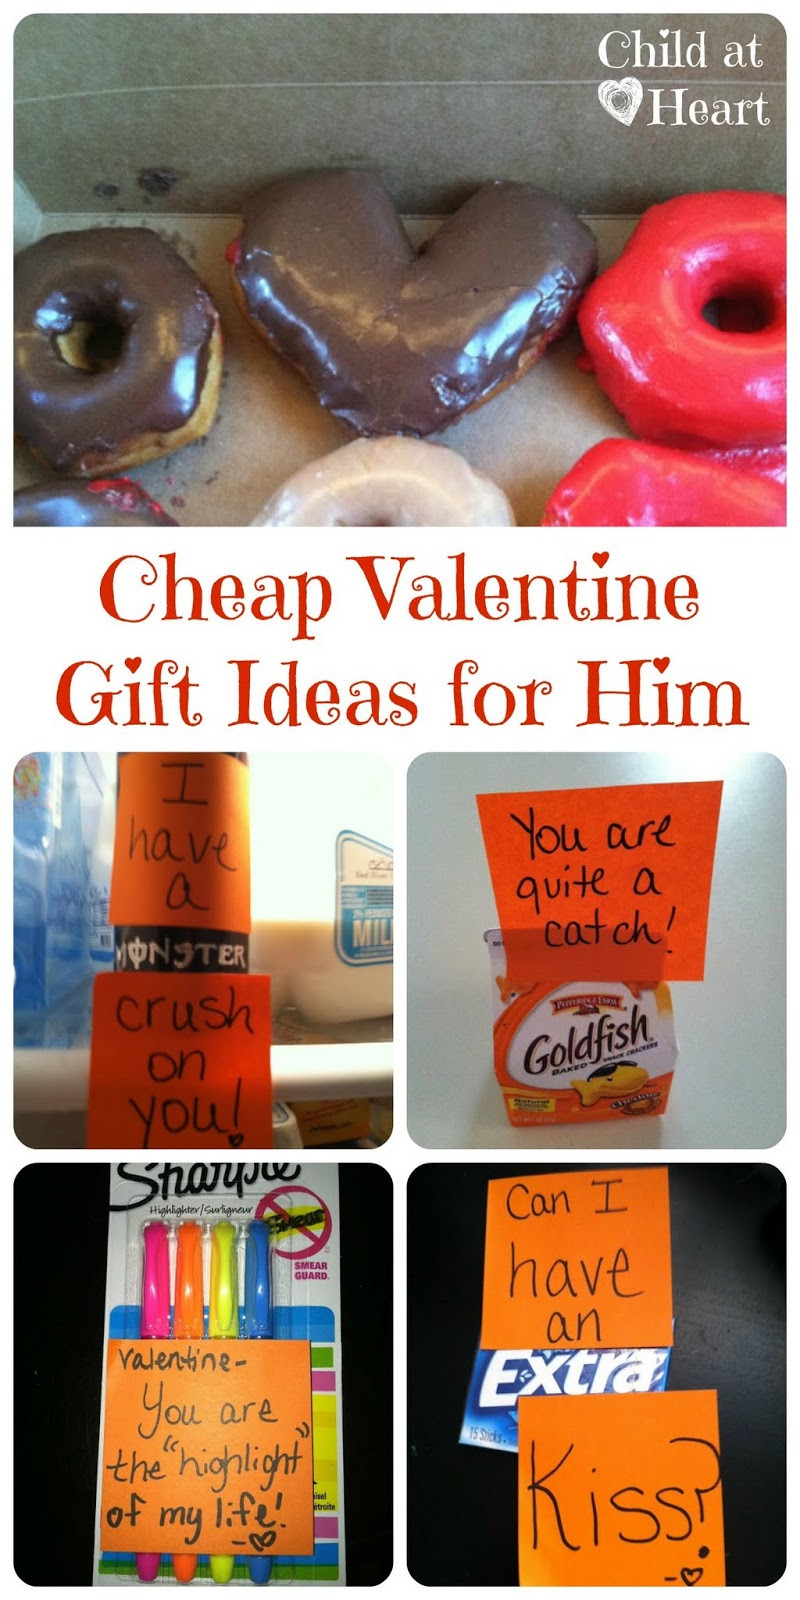 Gifts For Him Valentines Day
 Cheap Valentine Gift Ideas for Him Child at Heart Blog